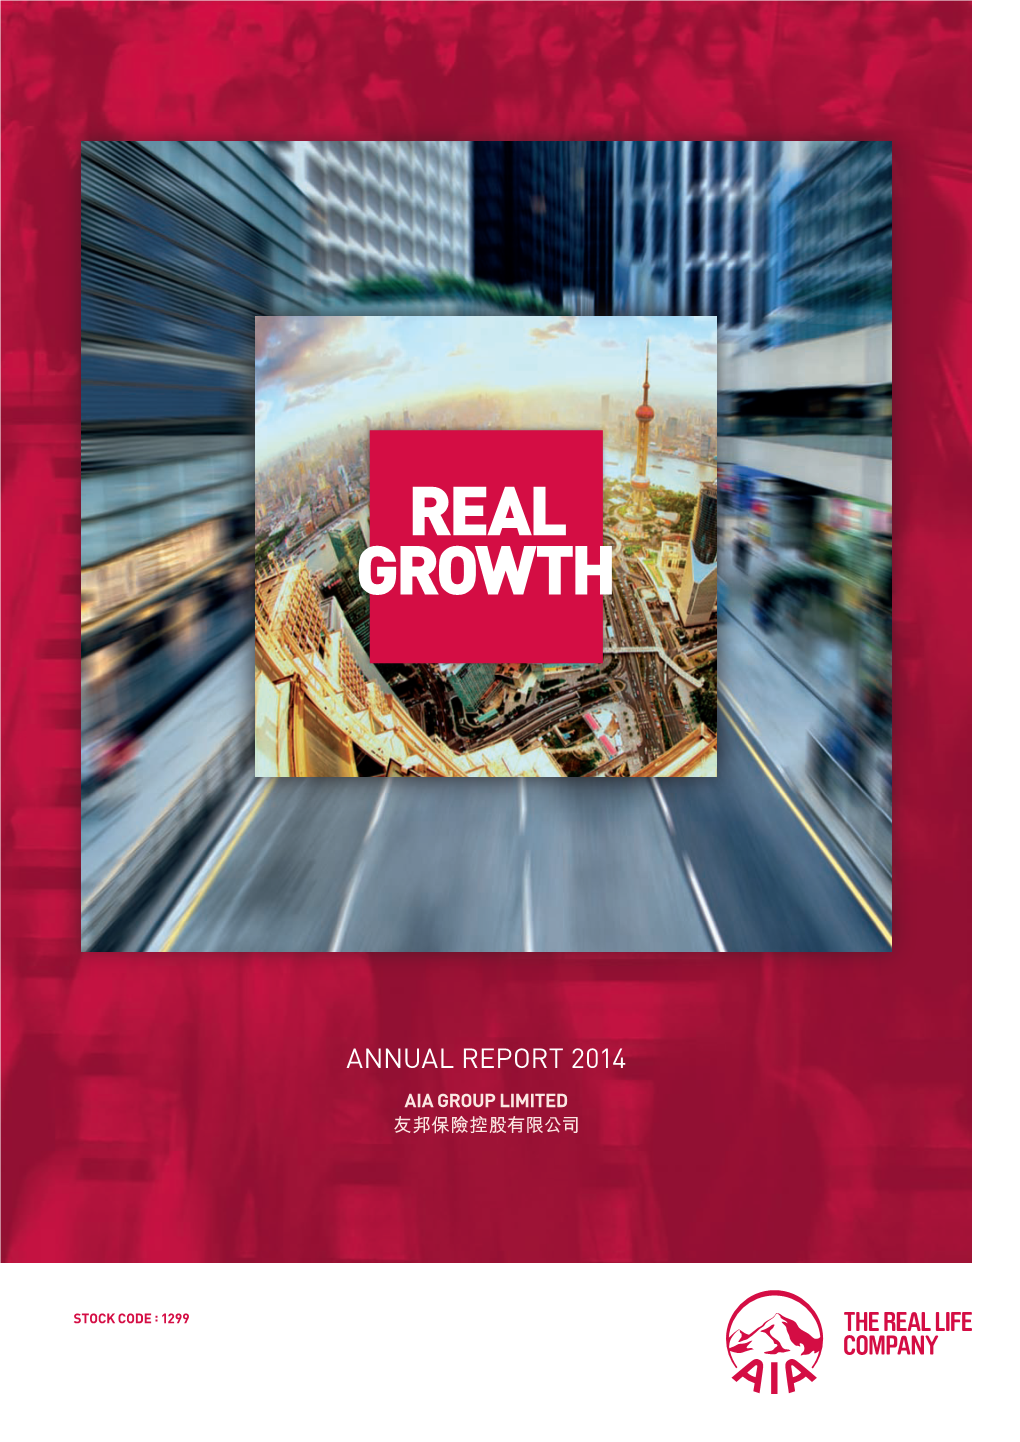 Aia Group Limited Annual Report 2014 039